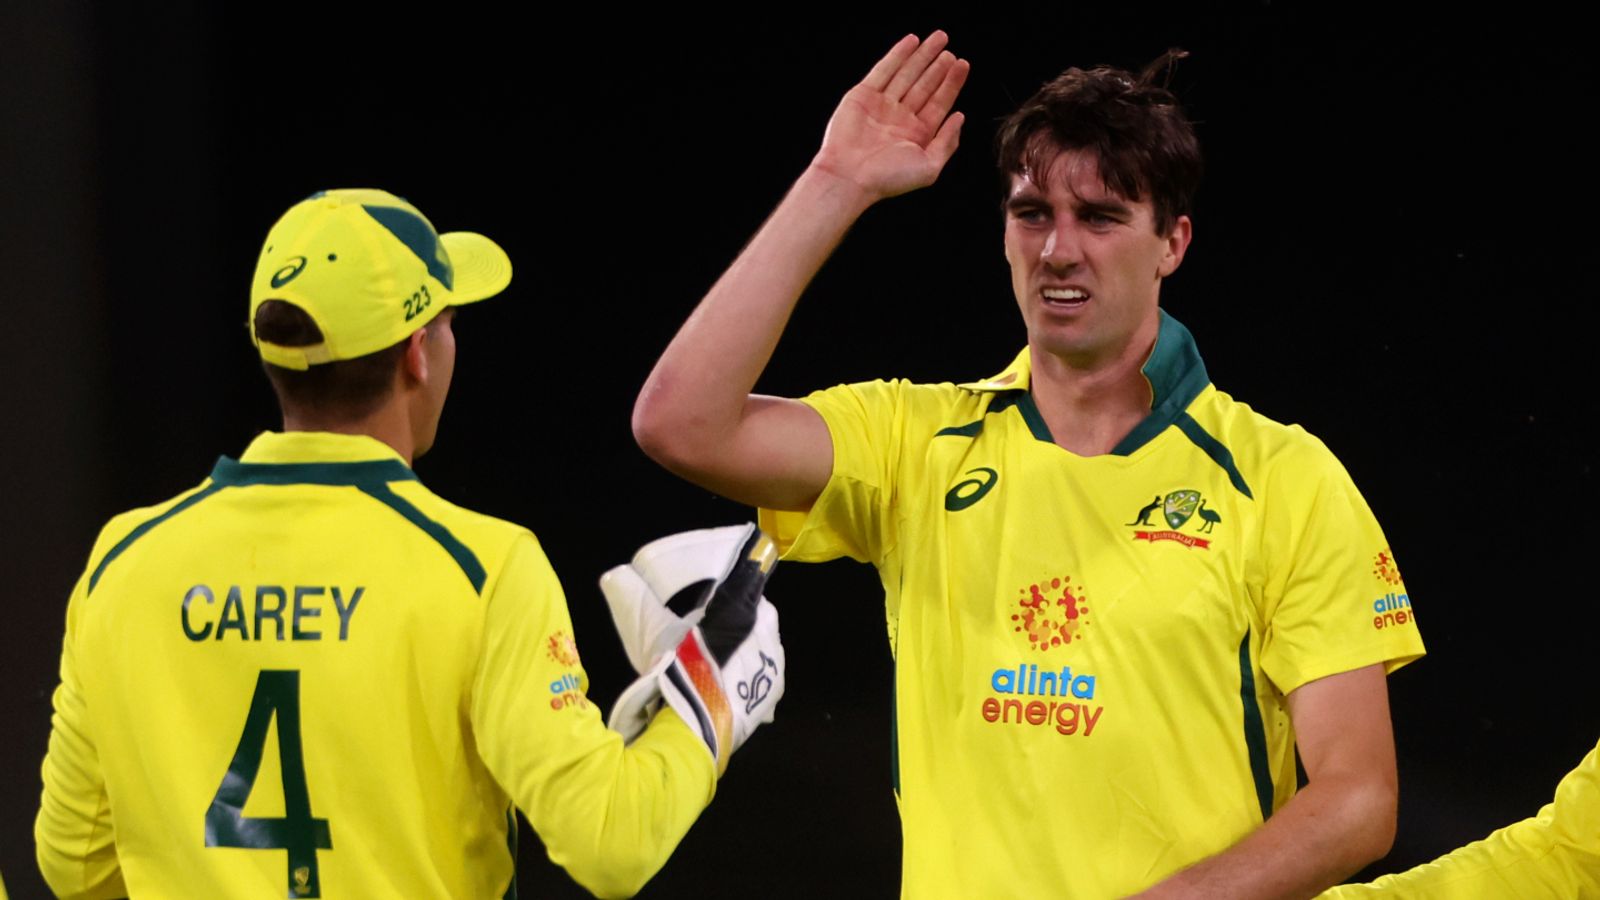 Australia thump England by 221 runs on DLS in Melbourne to clinch 3-0 one-day international series sweep